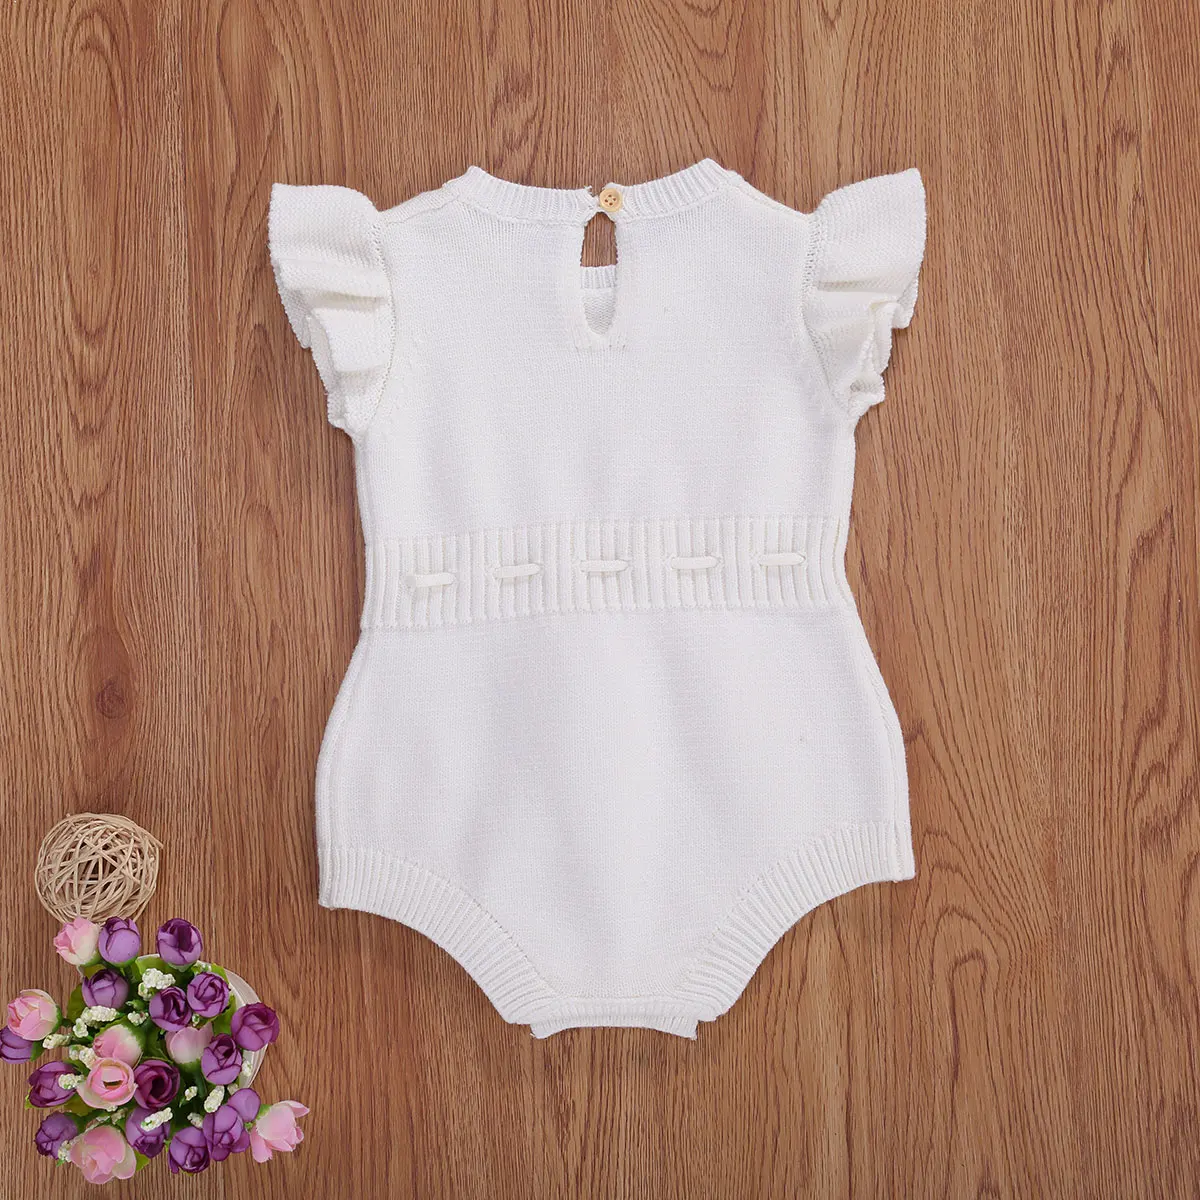 Pasgeboren Baby Wol Jumpsuit Baby Zomer Mode Casual Flying Mouwen Lace Up Body Baby Winter Herfst Warme Kleding